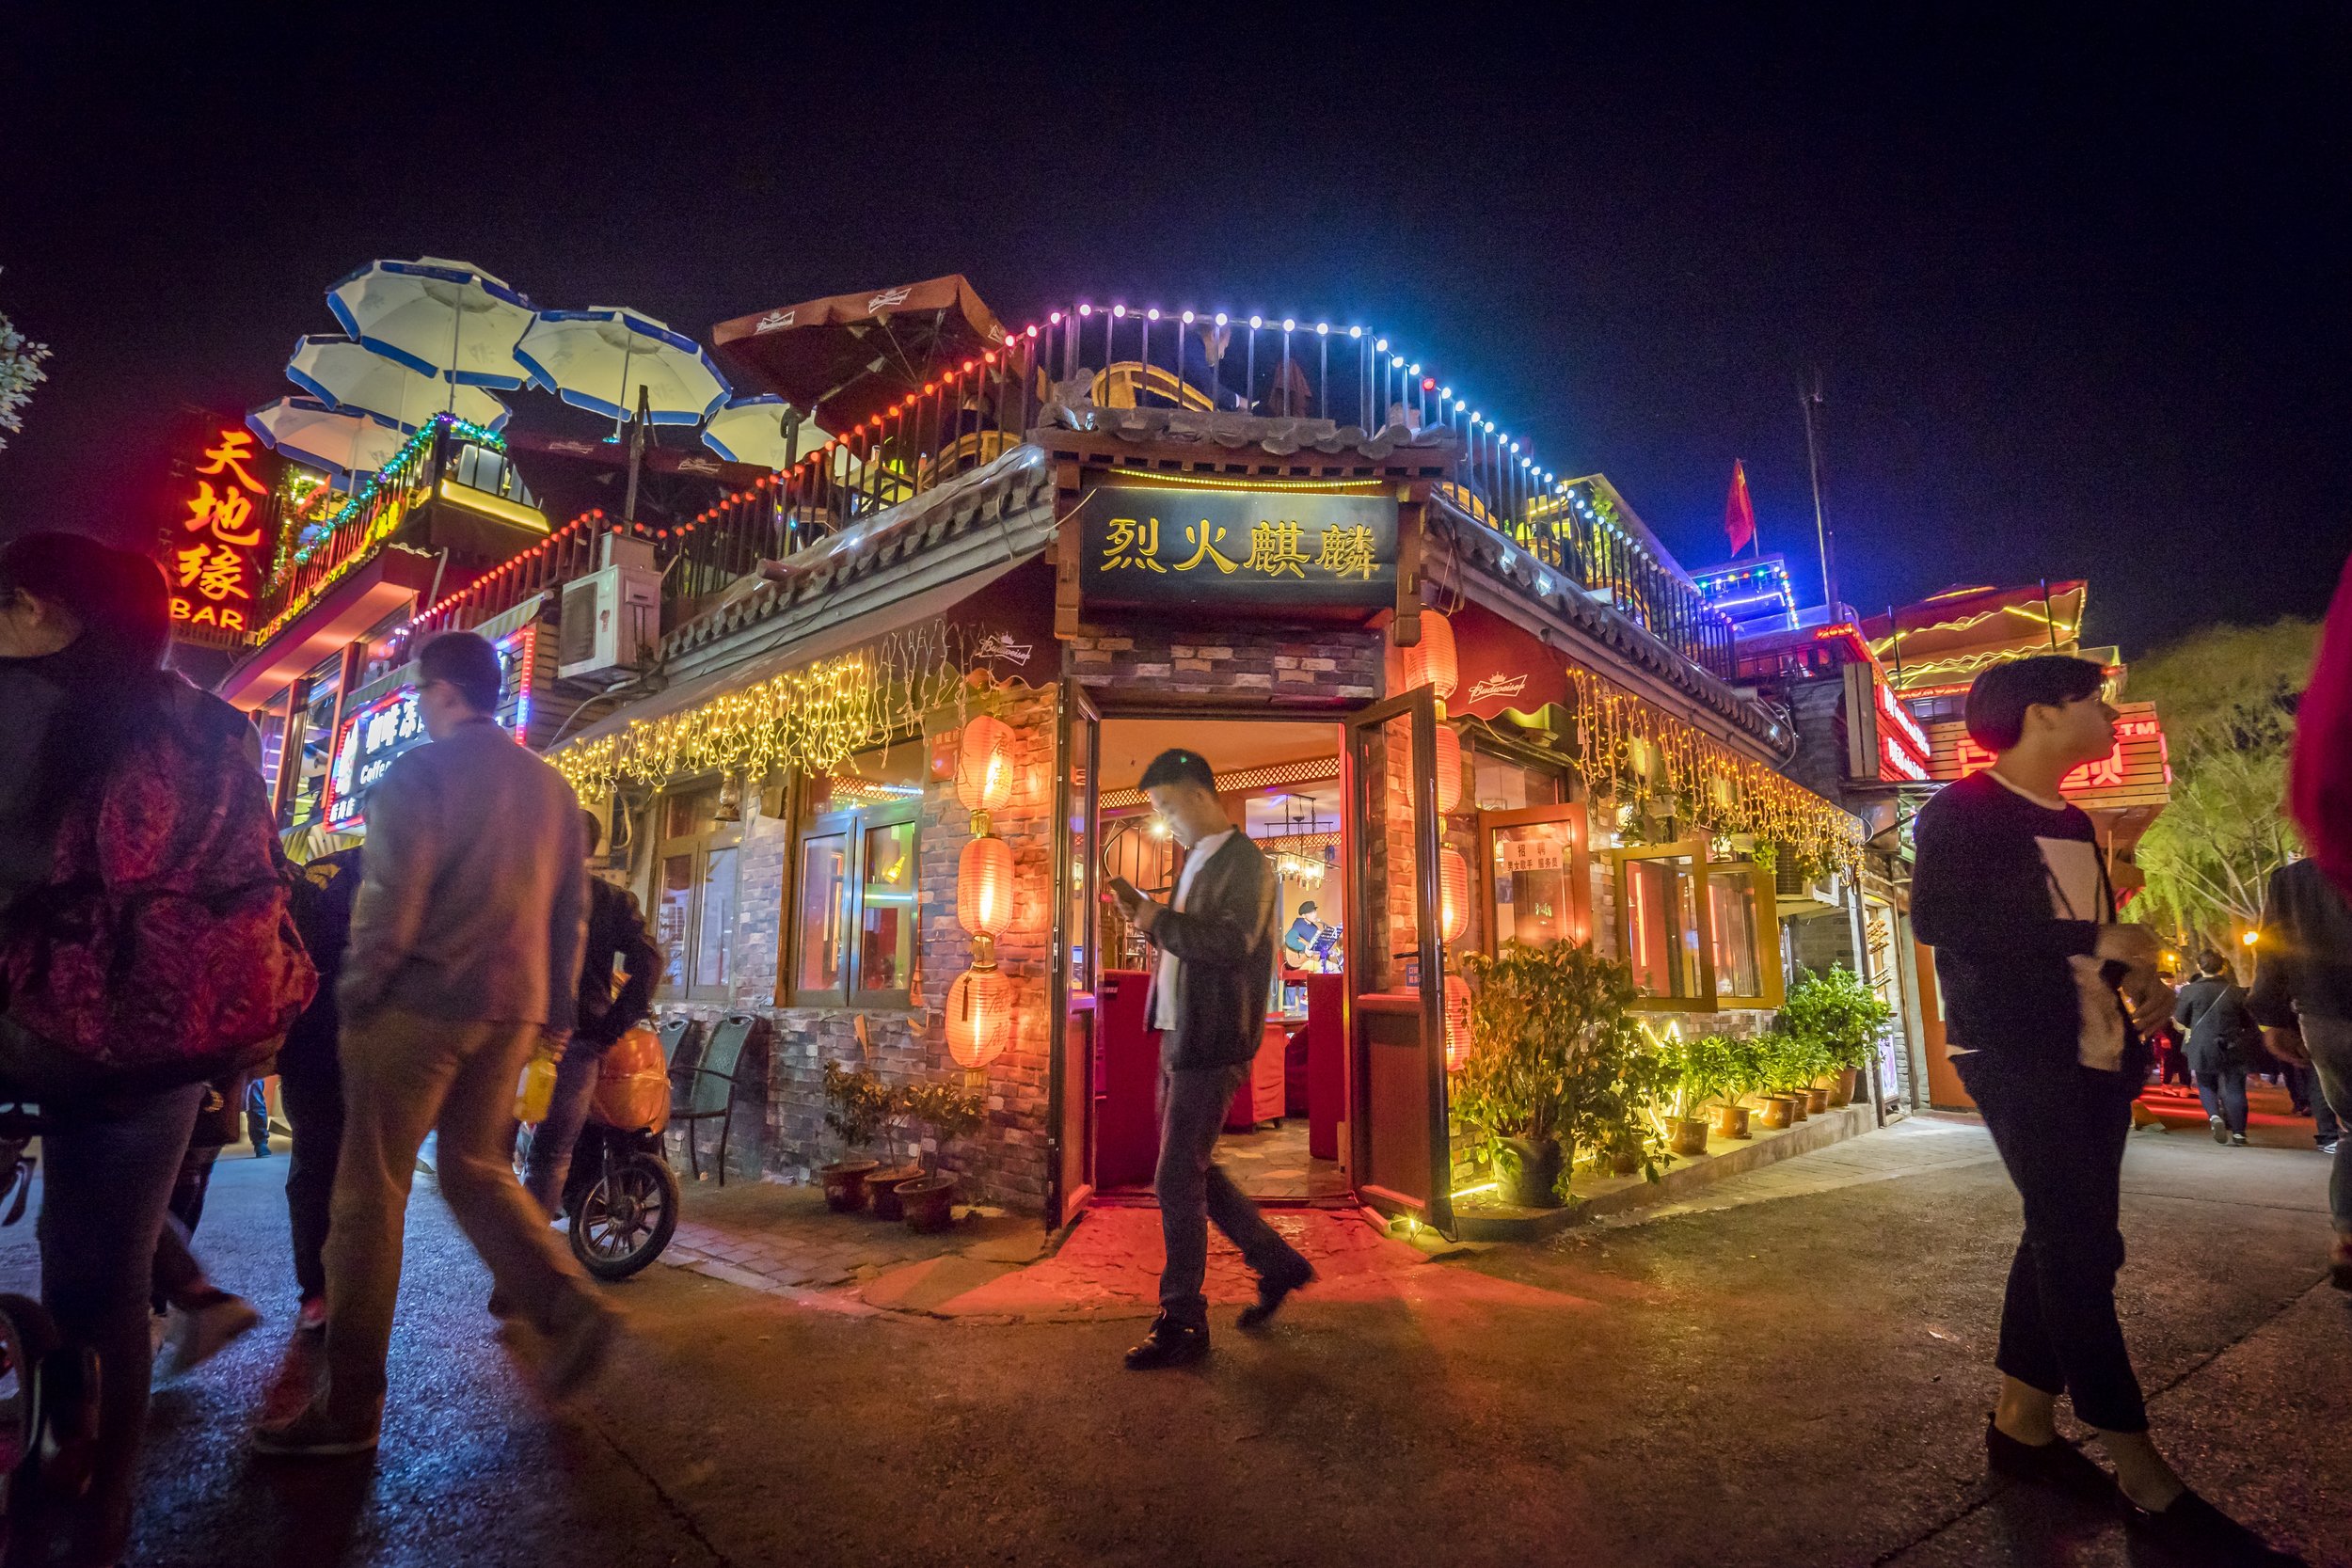  A few days into our time exploring Beijing we ended up in the Houhai nightlife district. There we found endless bars all decked out with colourful lights each featuring a singer songwriter or a small band. Venues would differentiate themselves by th